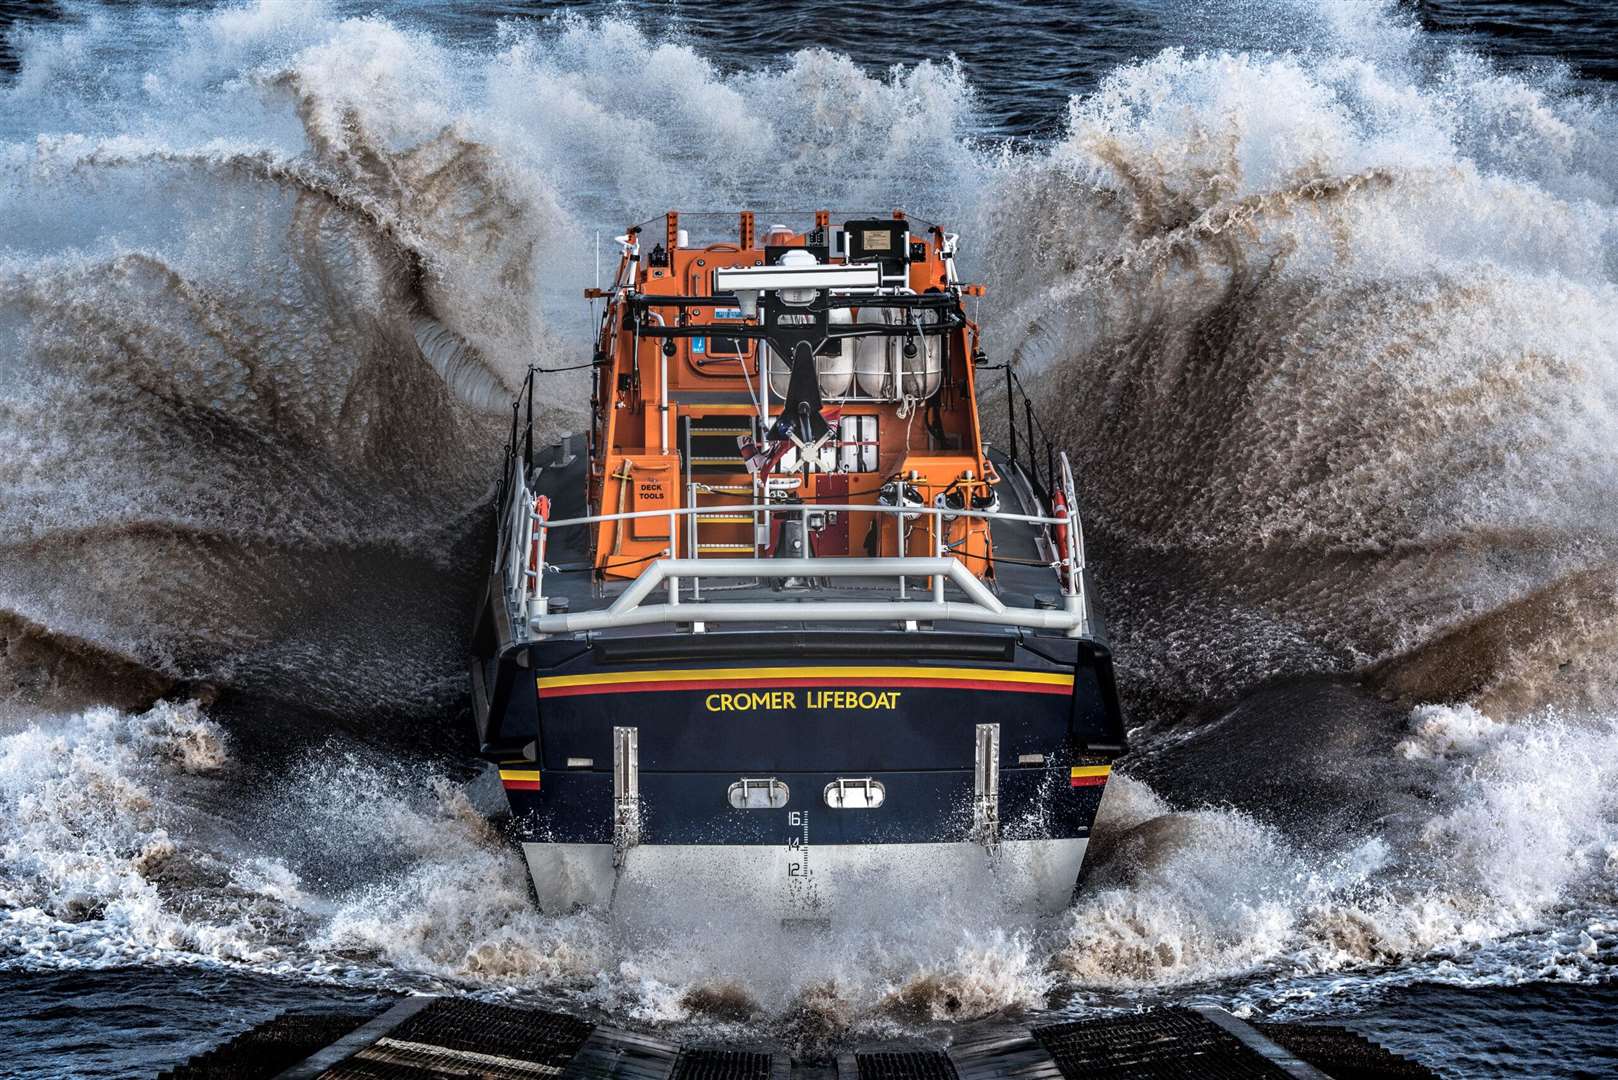 To The Rescue, showing the launch of Cromer lifeboat, by Stephen Duncombe, winner in the Industry category